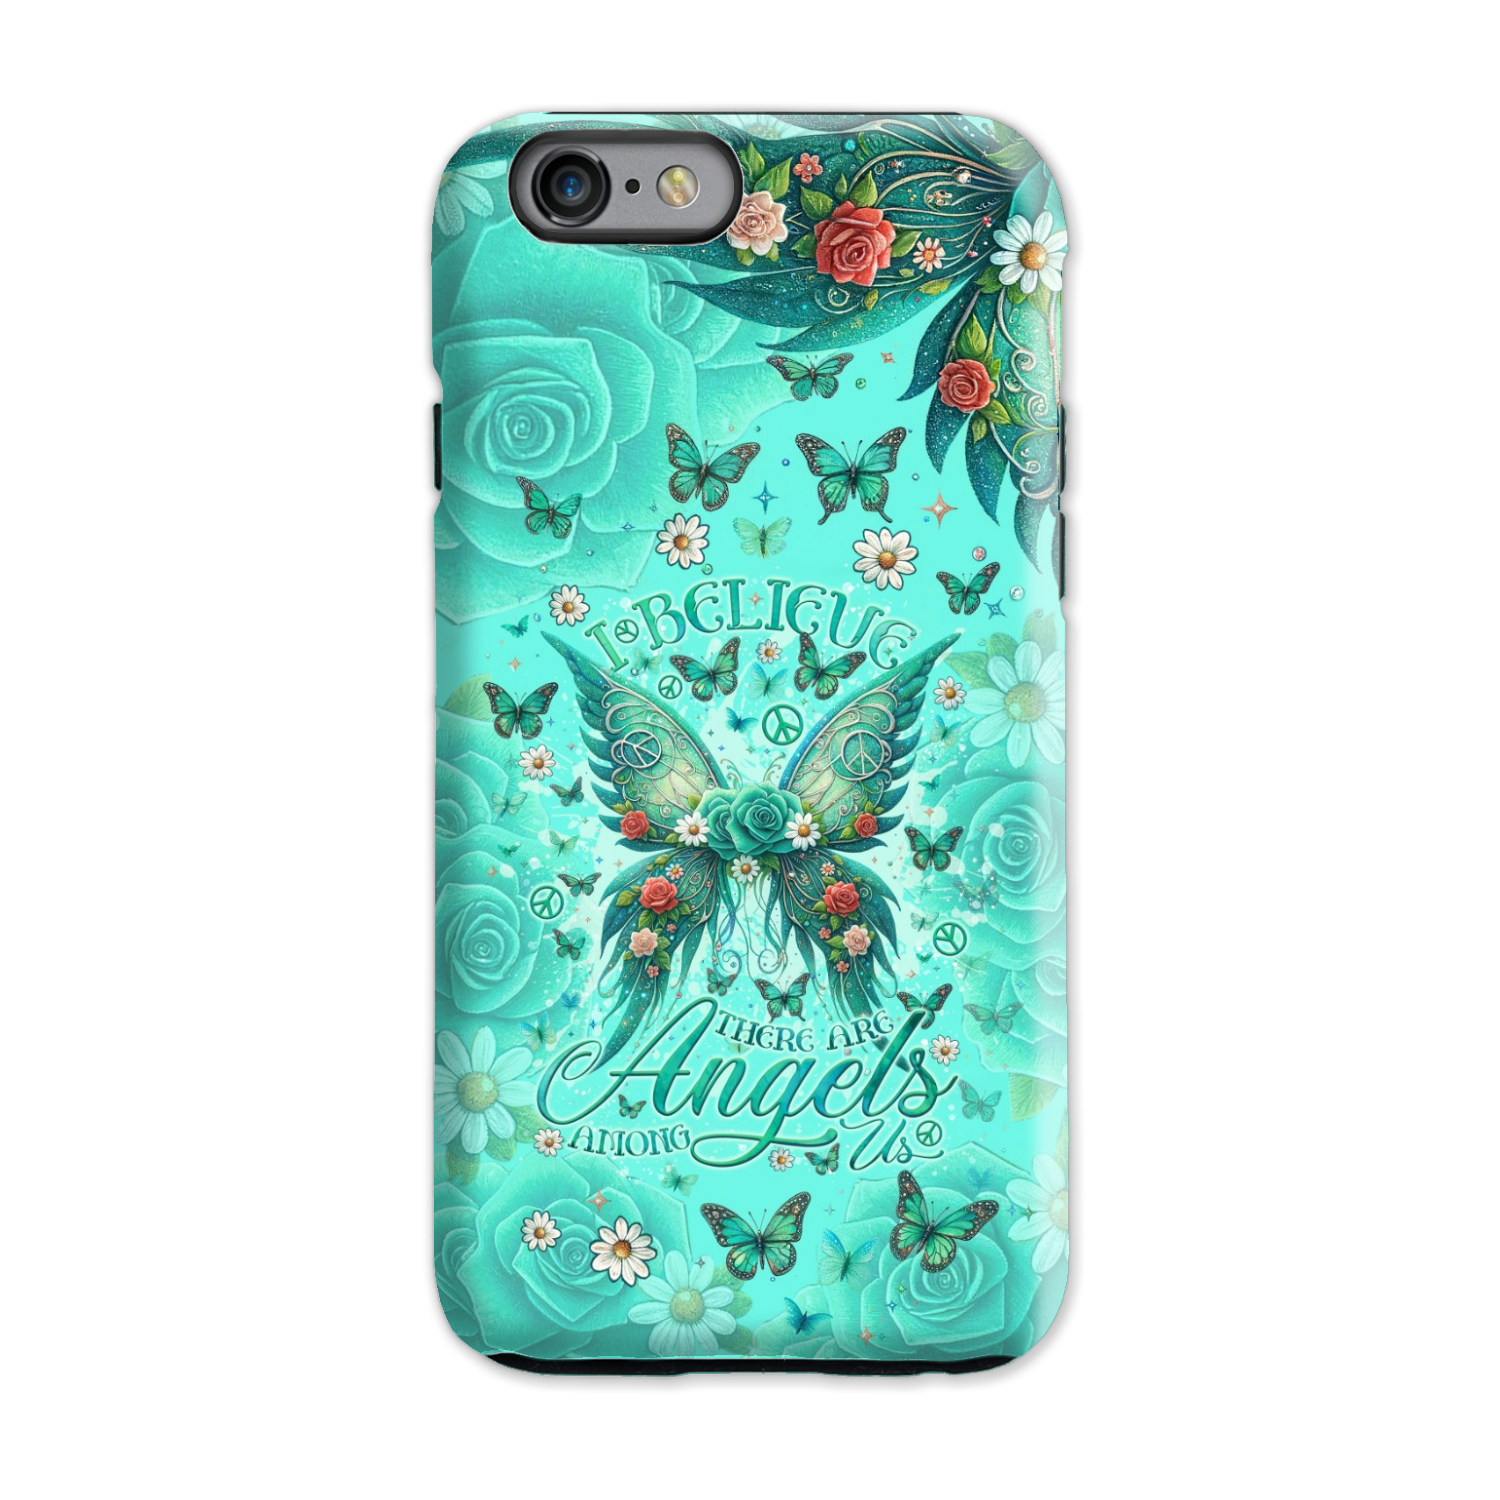 I BELIEVE THERE ARE ANGELS AMONG US WINGS PHONE CASE - TLNO2803242